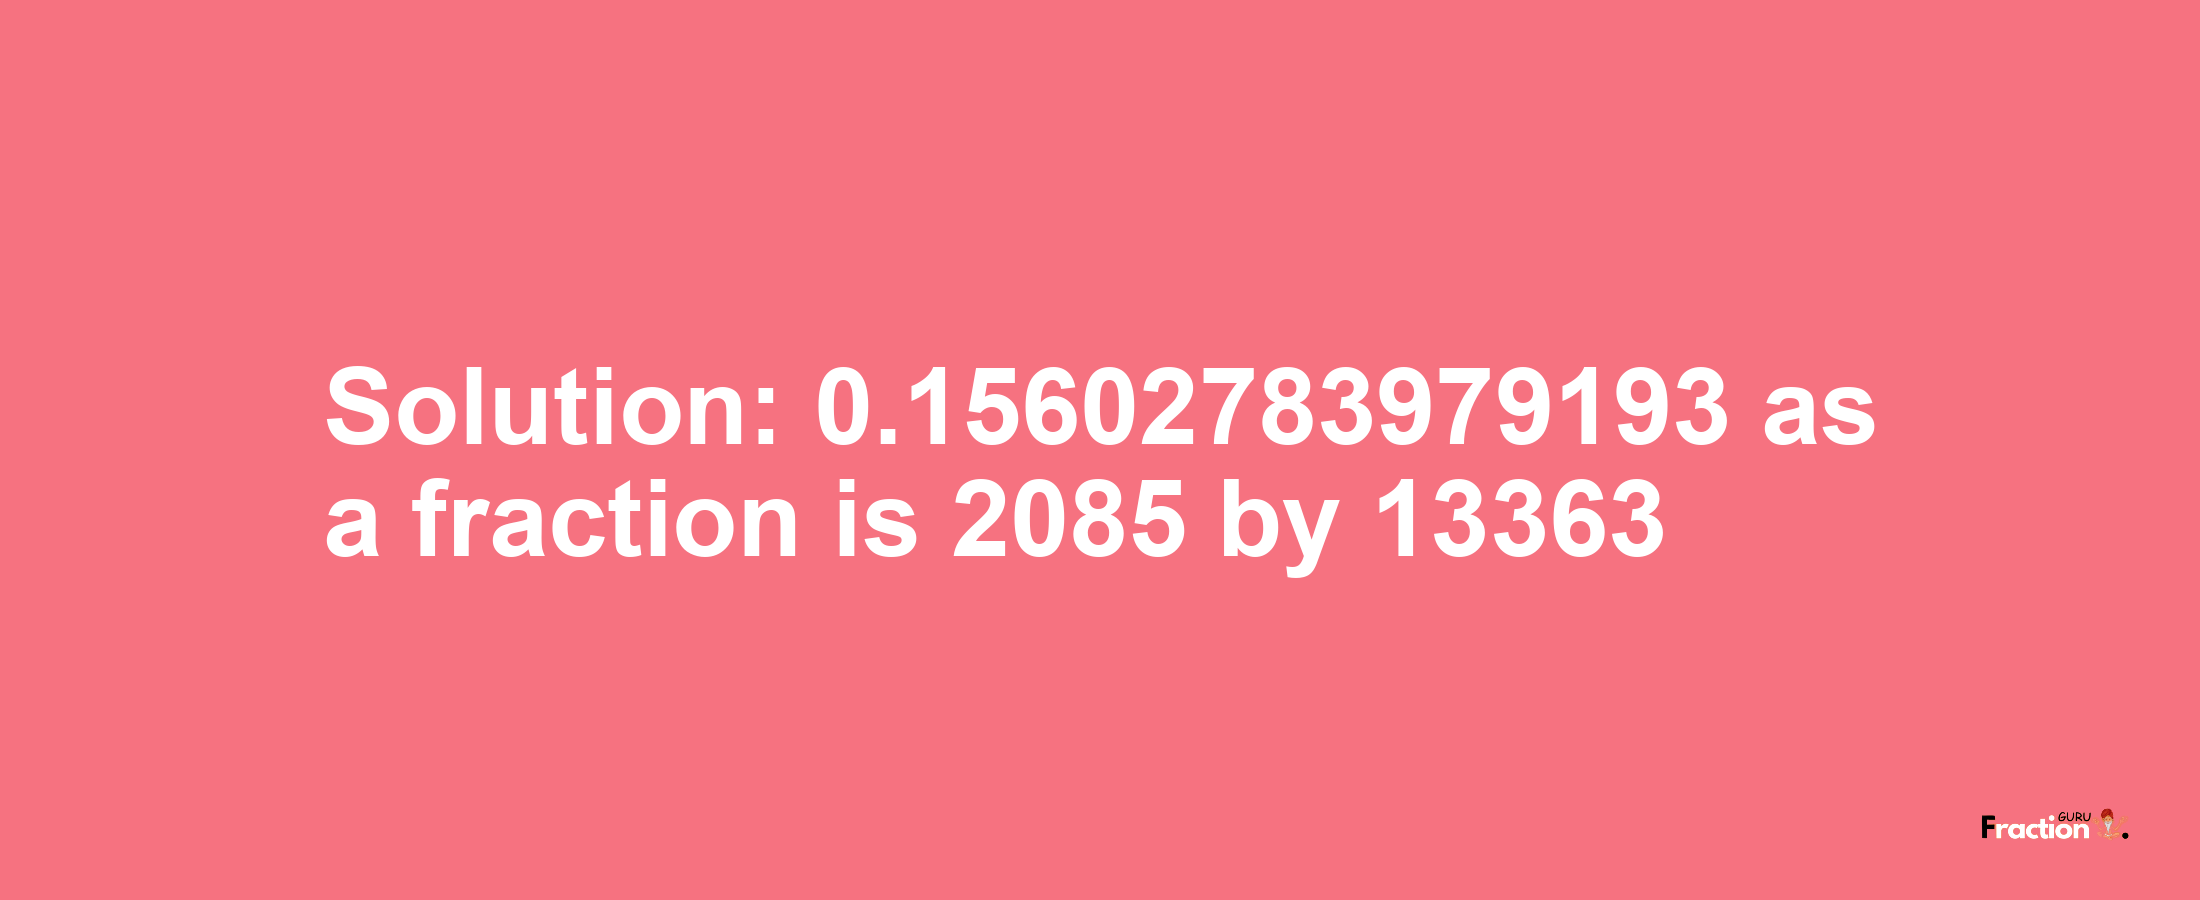 Solution:0.15602783979193 as a fraction is 2085/13363